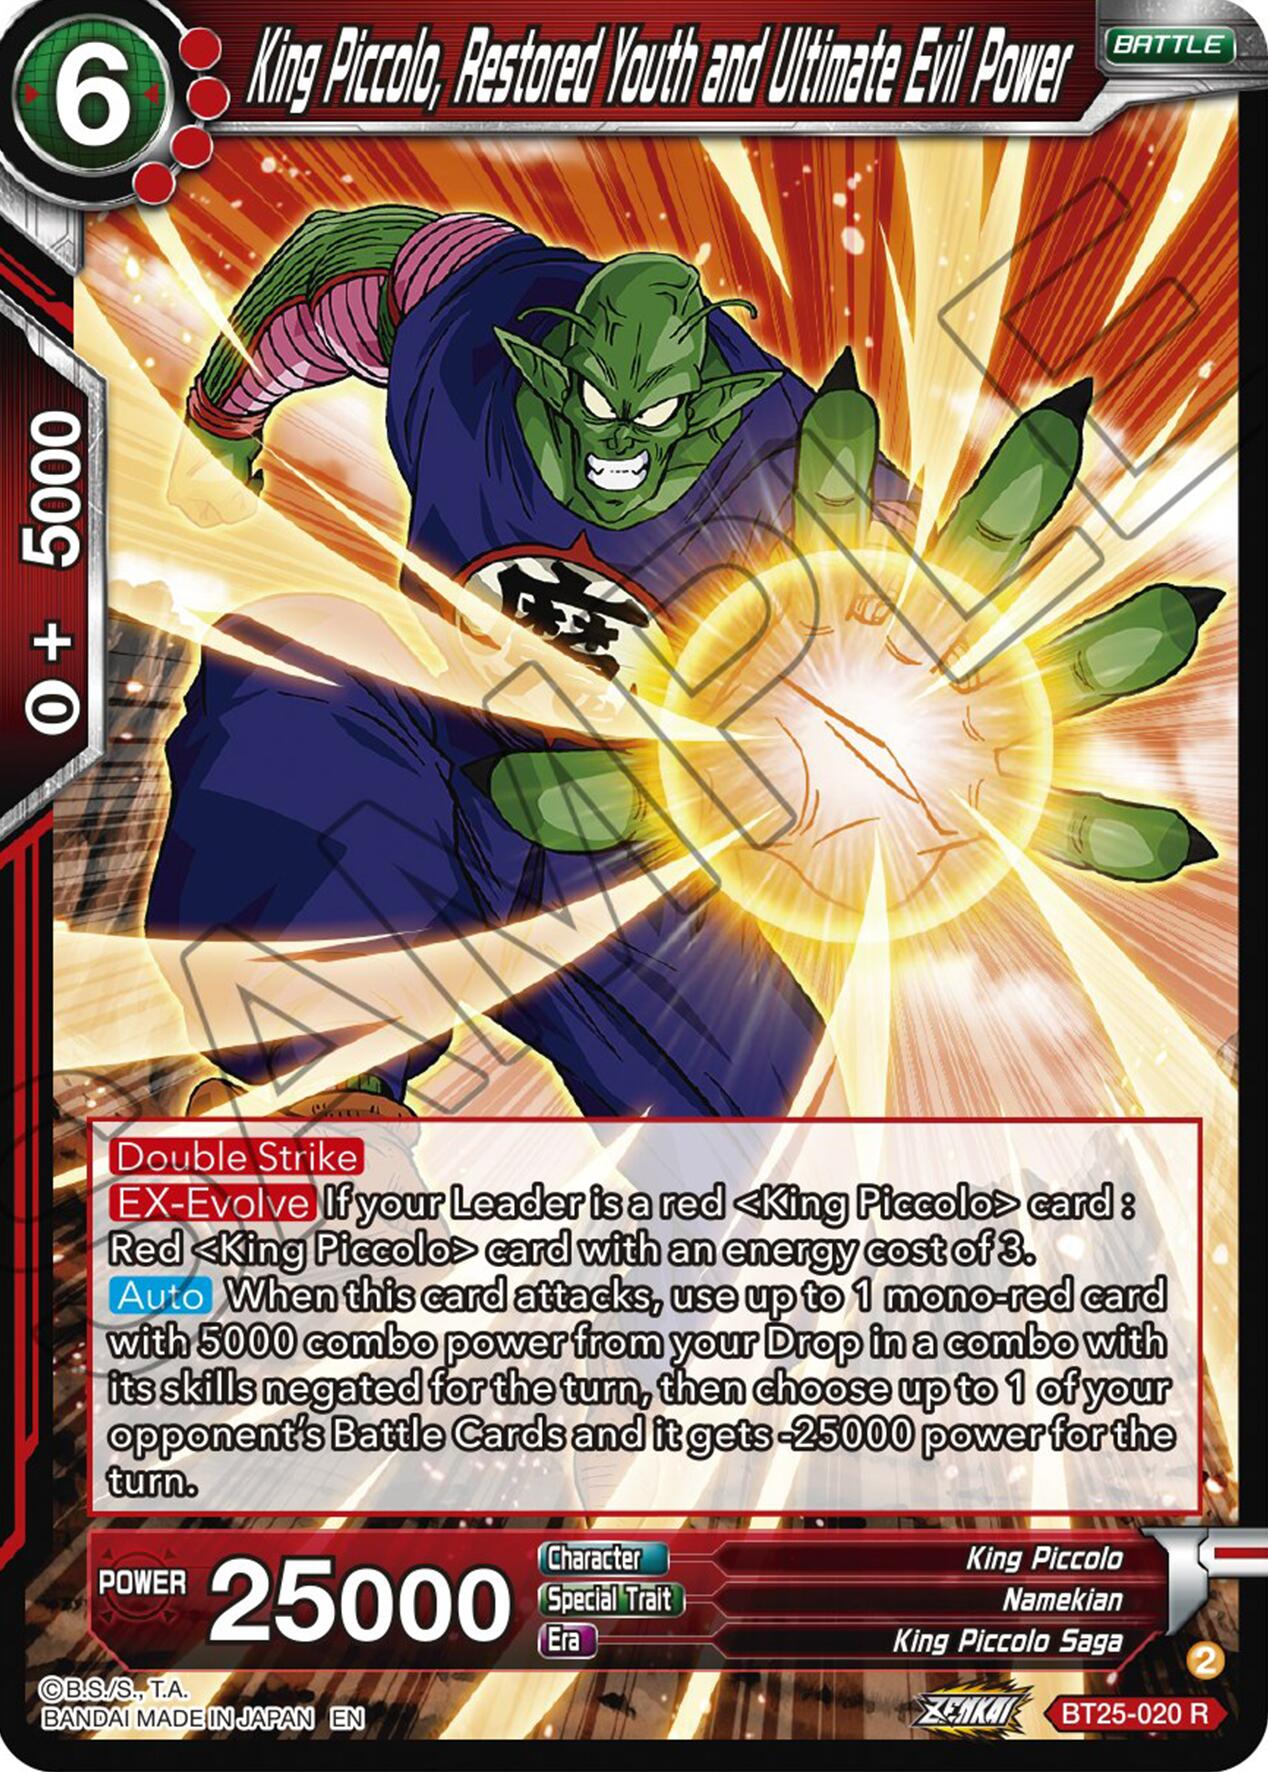 King Piccolo, Restored Youth and Ultimate Evil Power (BT25-020) [Legend of the Dragon Balls] | Gauntlet Hobbies - Angola